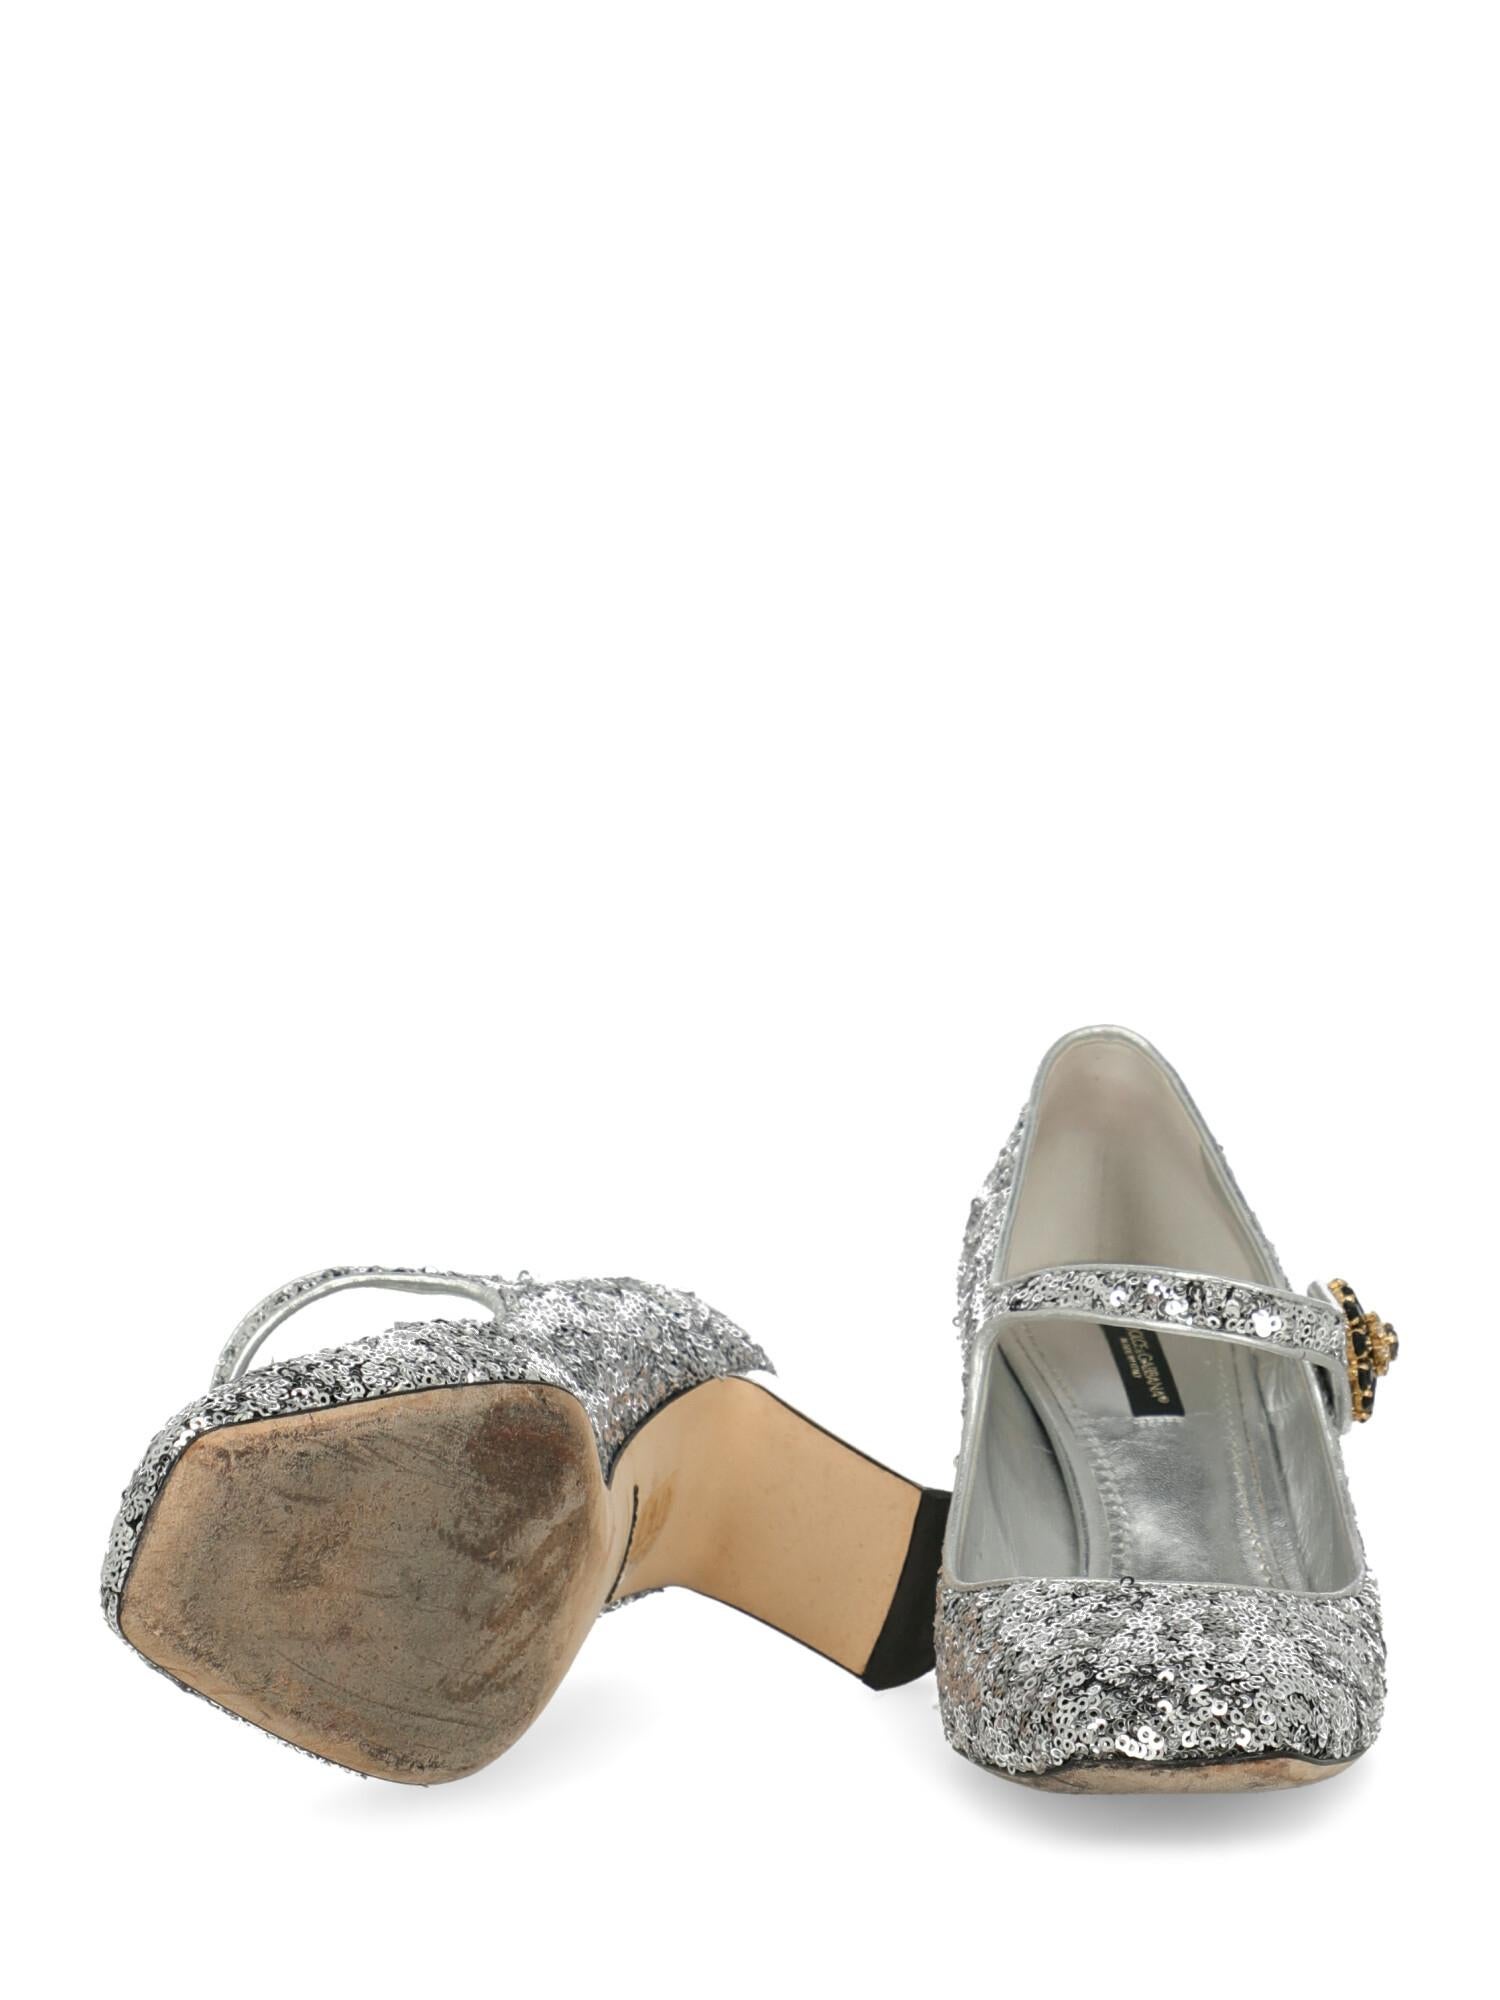 Dolce & Gabbana Woman Pumps Silver Leather IT 39 For Sale 1